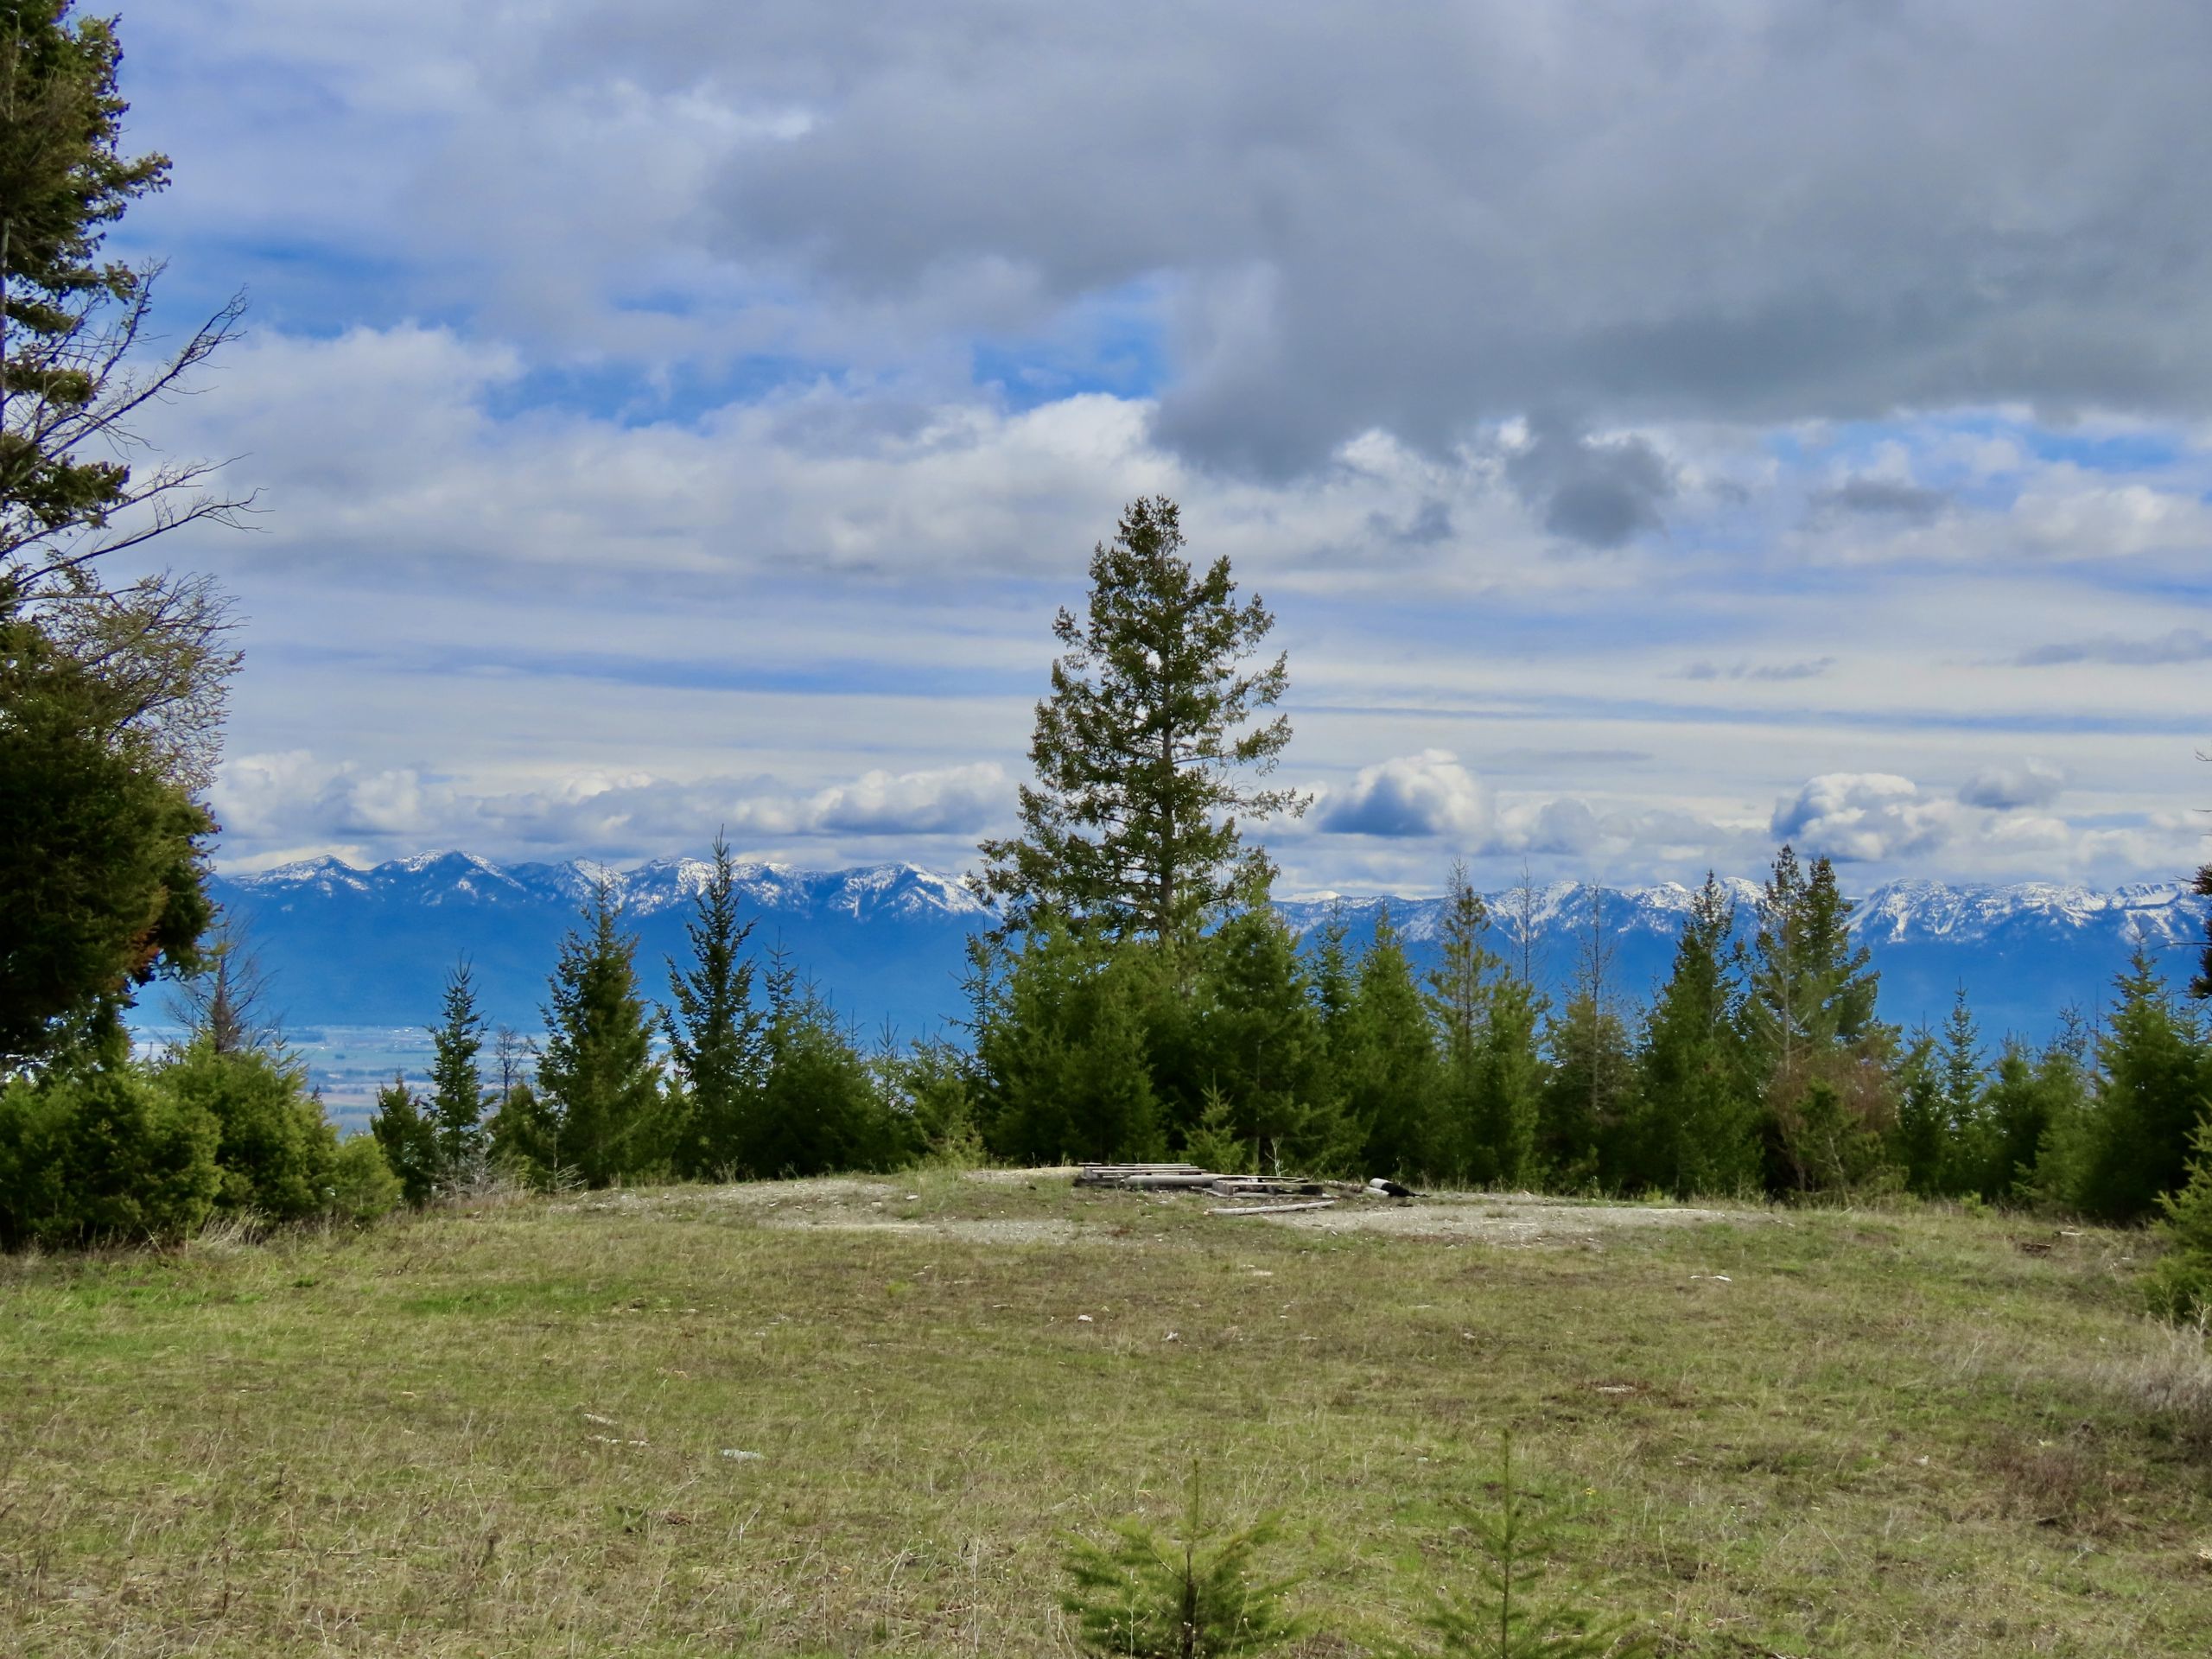 For Sale: One Parcel or Two -- Old Coon Hollow Road, Kalispell photo of mountains